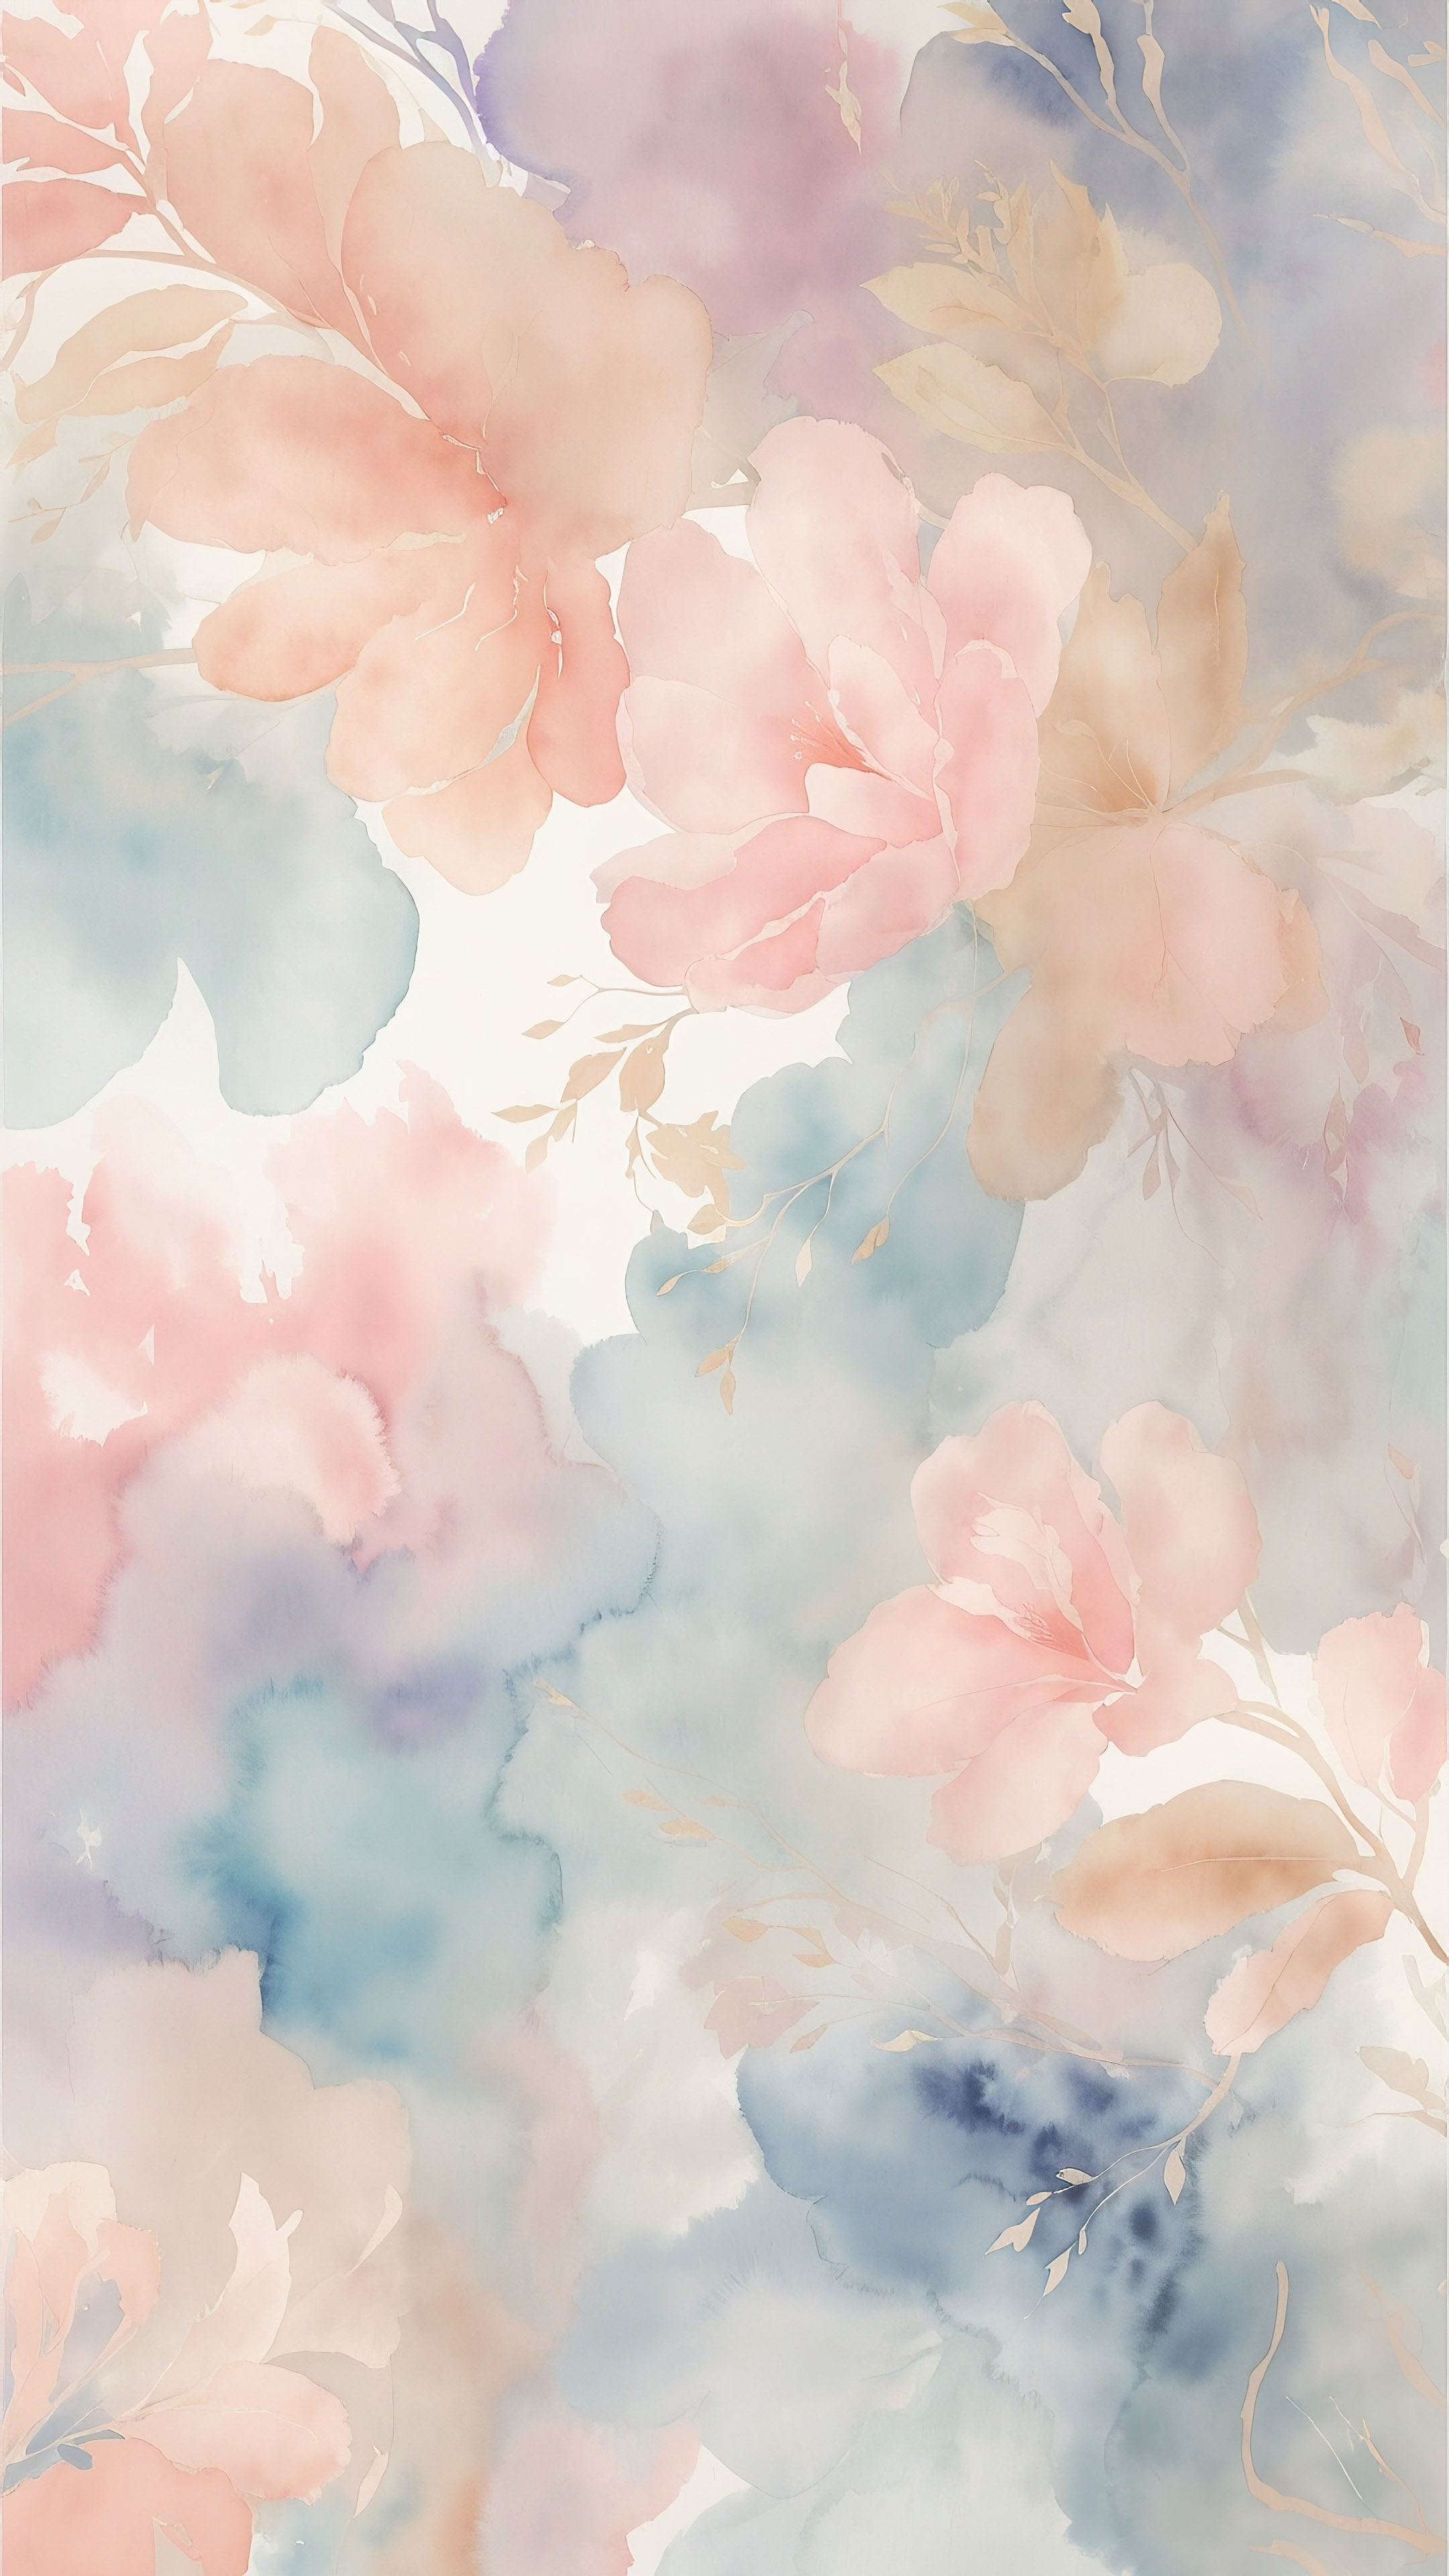 Experience serenity with abstract 4k phone wallpaper, boasting a dreamy watercolor effect in soft pastels.